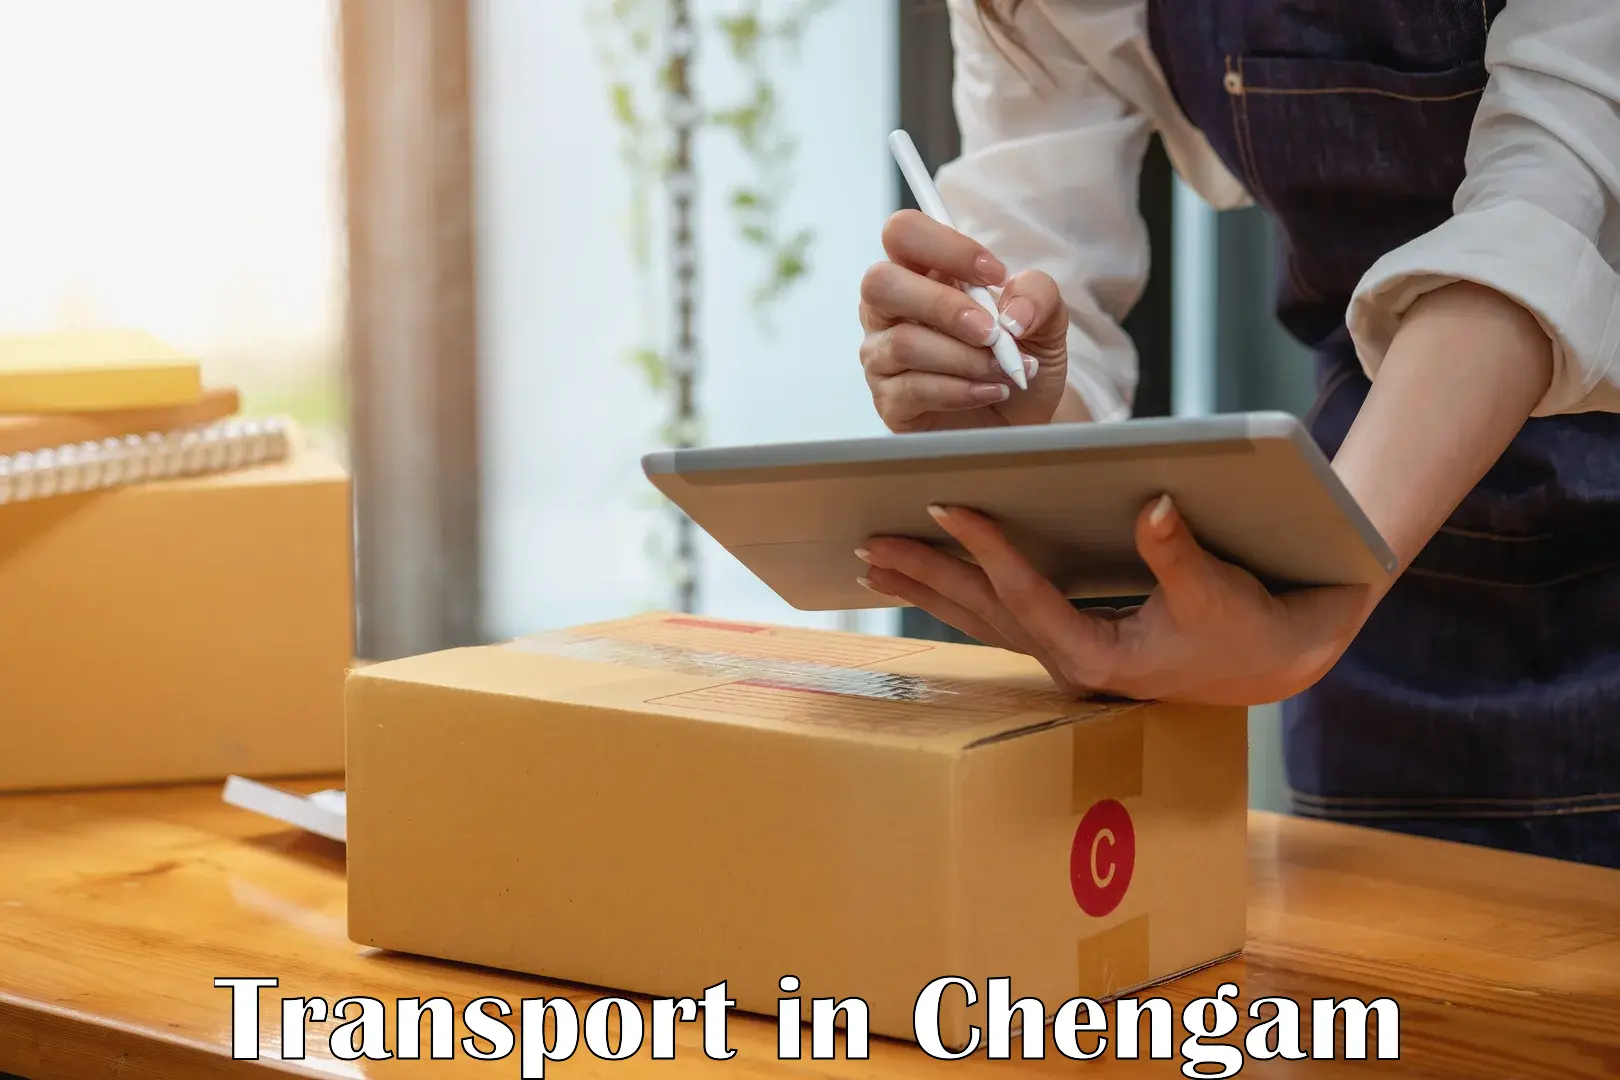 Cargo transportation services in Chengam